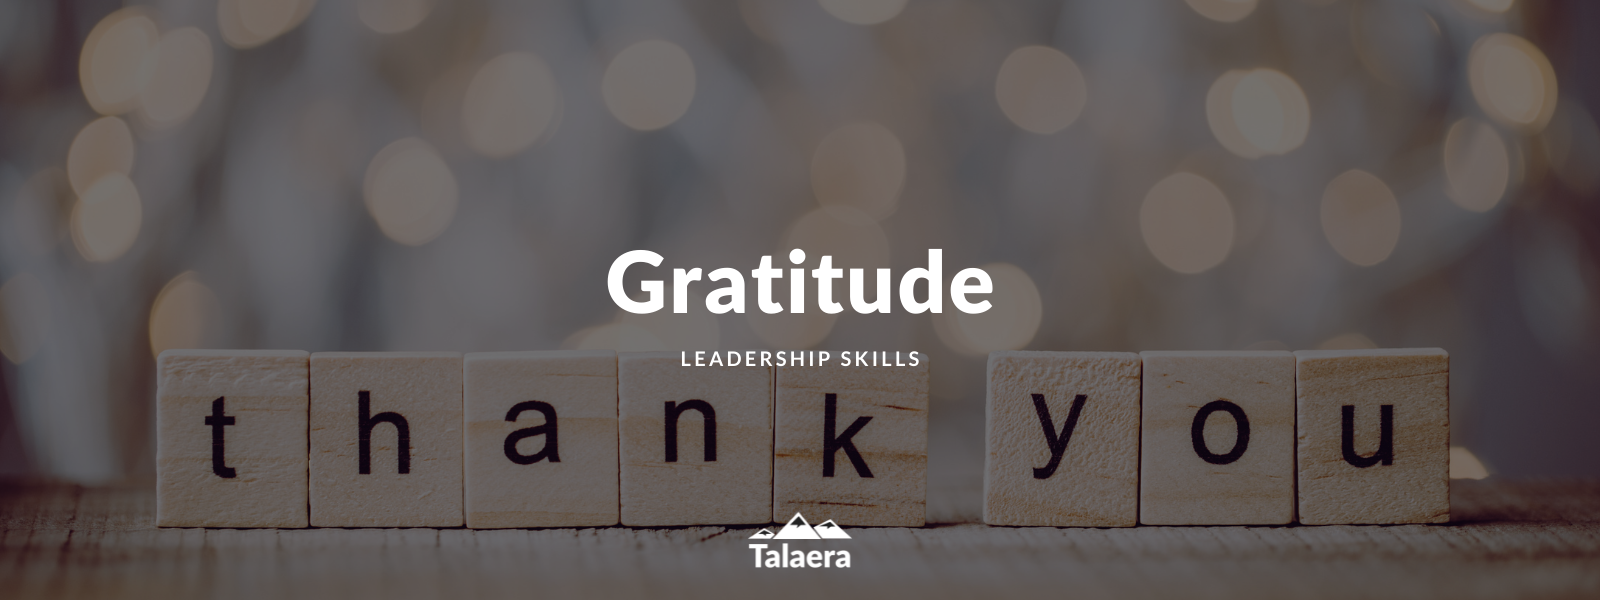 Gratitude Is Your Most Powerful Leadership Skill. Here's How To Foster It - Talaera